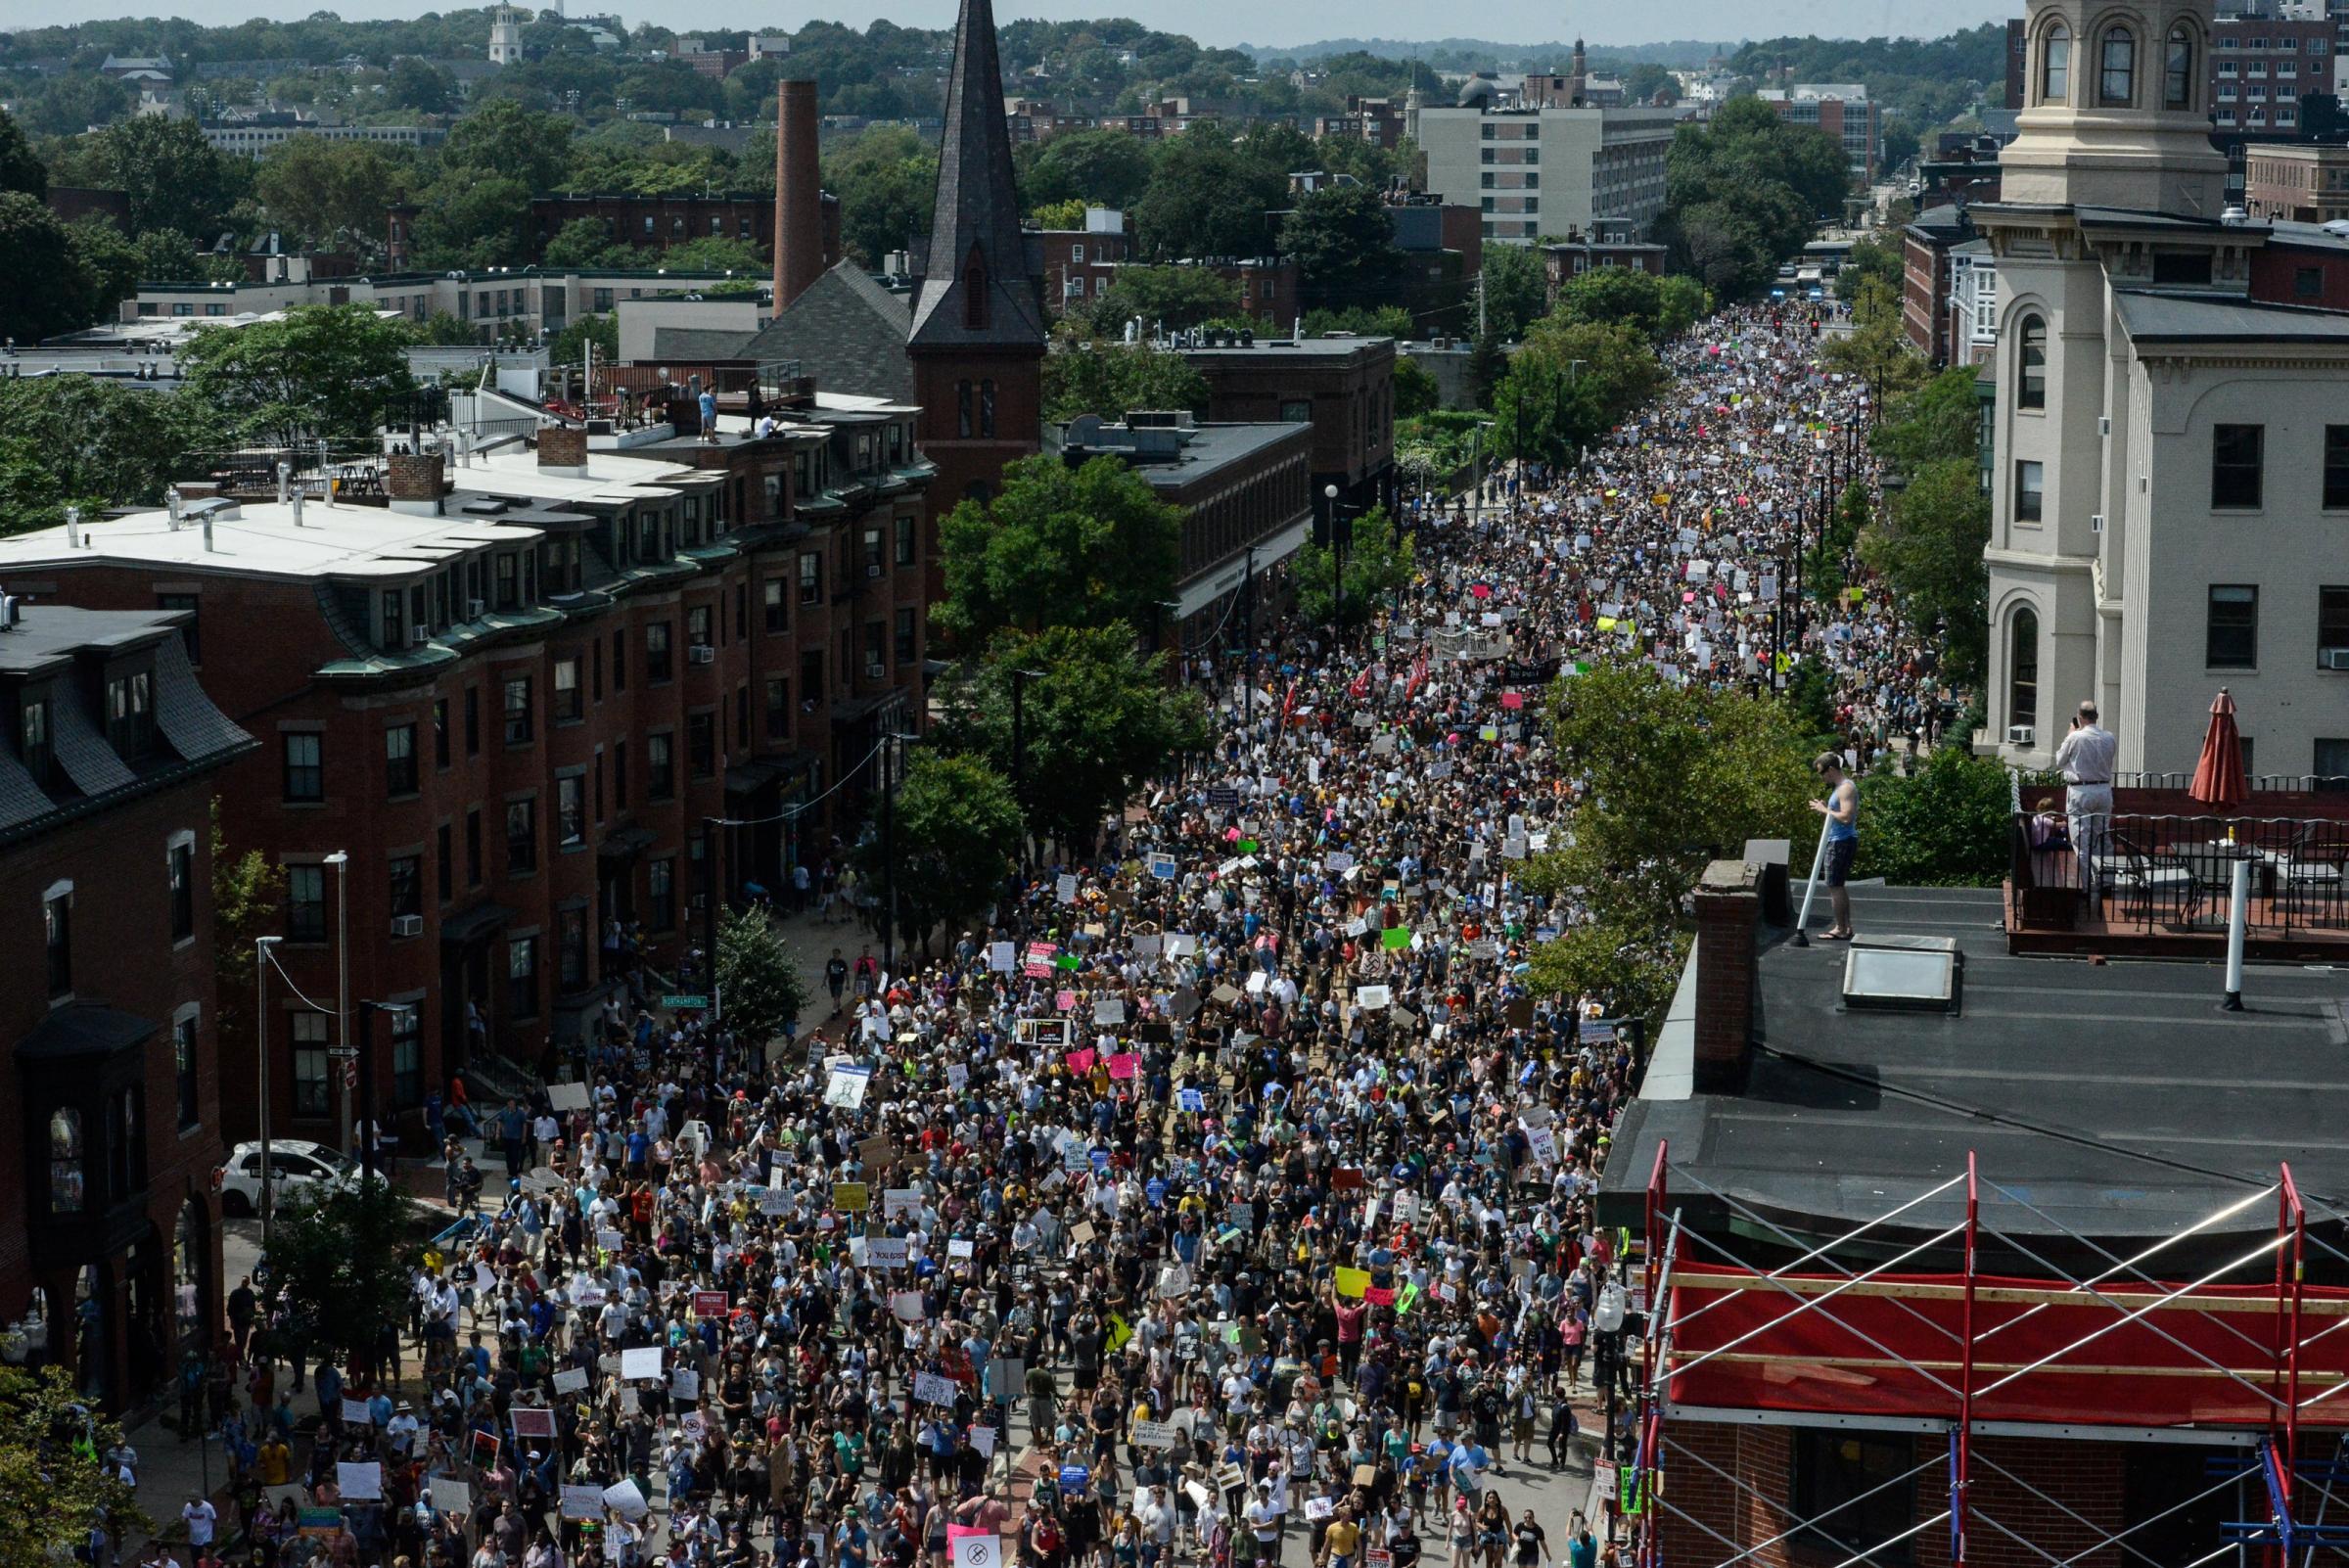 A large crowd of people march towards the Boston Commons to protest the Boston Free Speech Rally in Boston, MA